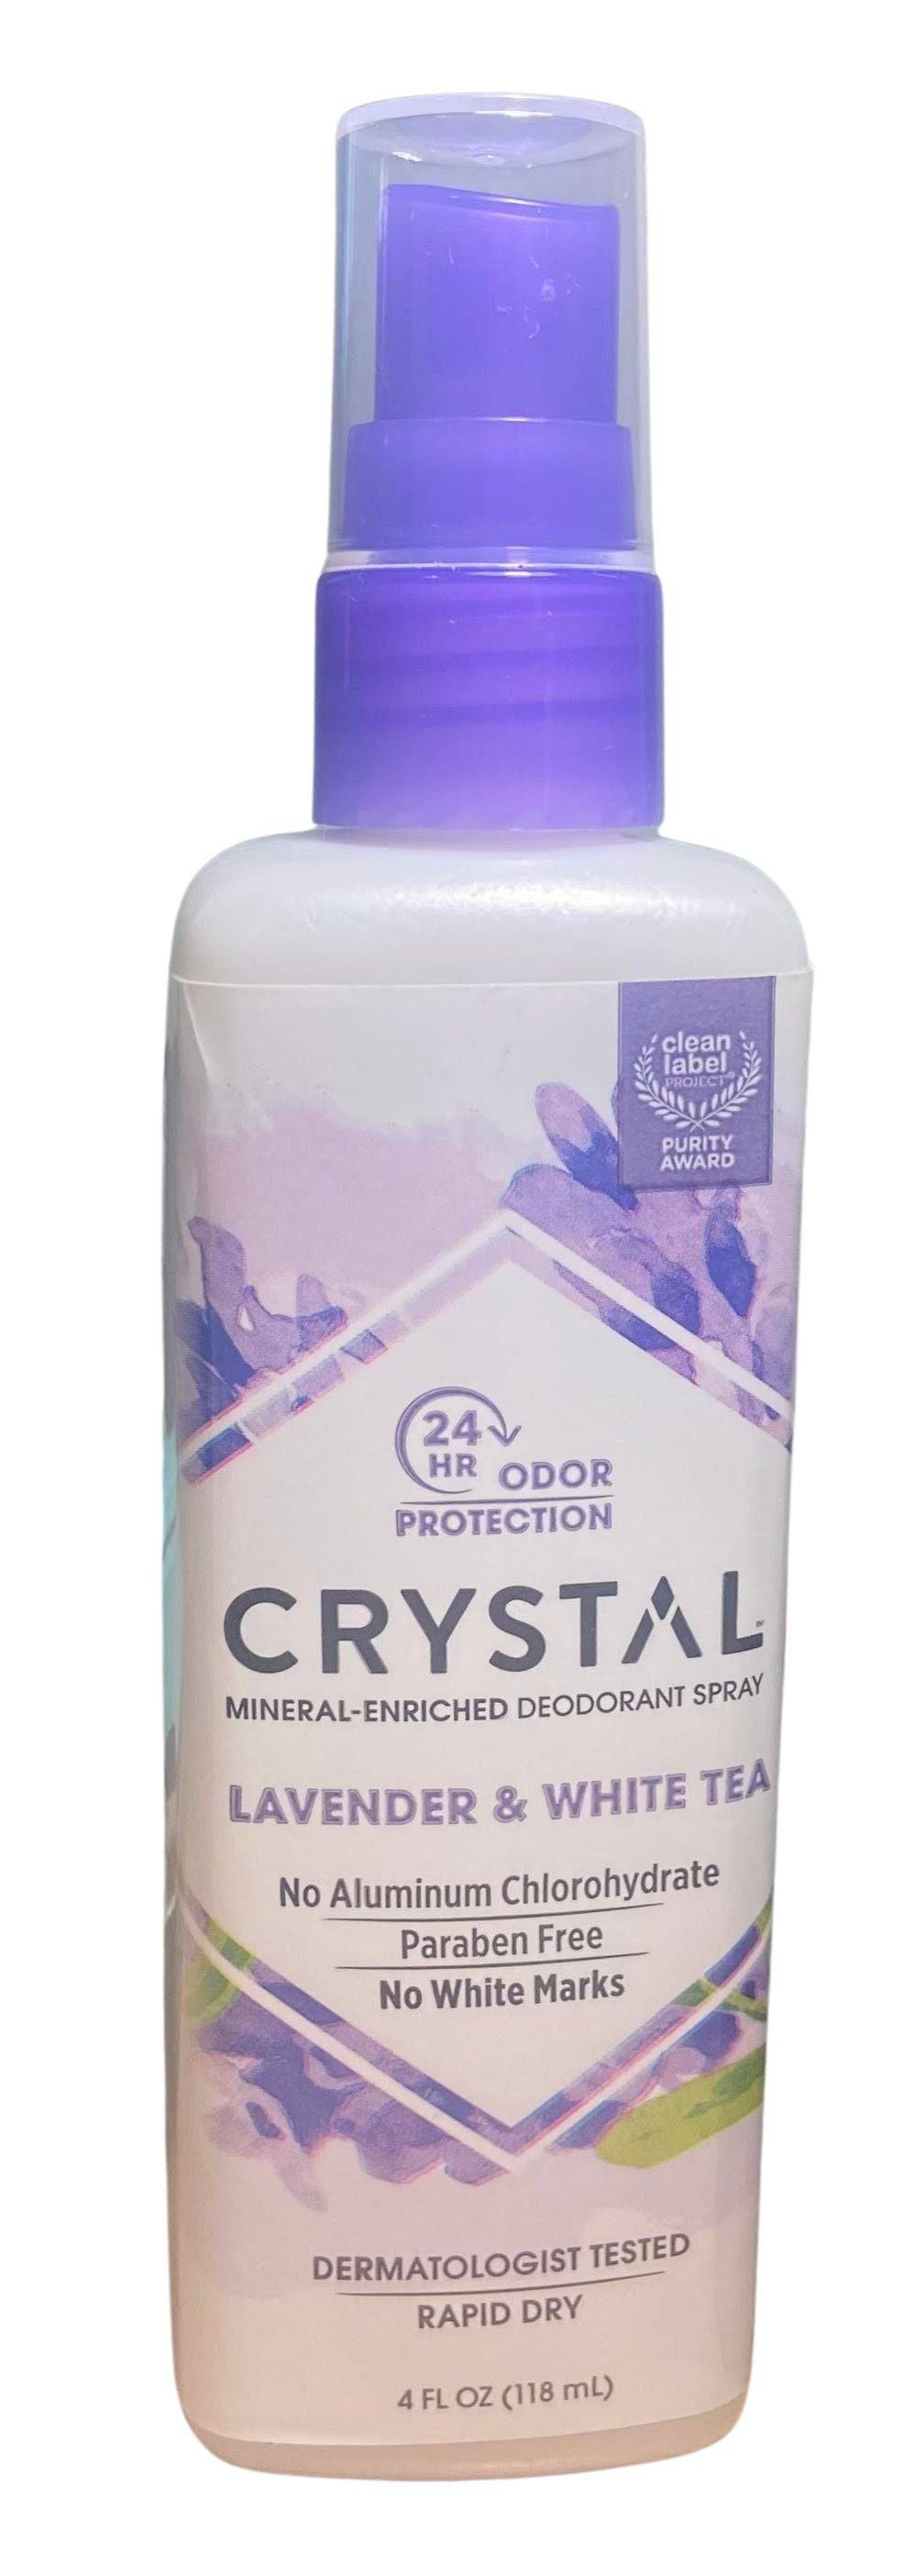 Crystal Deodorant Spray Lavender & White Tea - Country Life Natural Foods